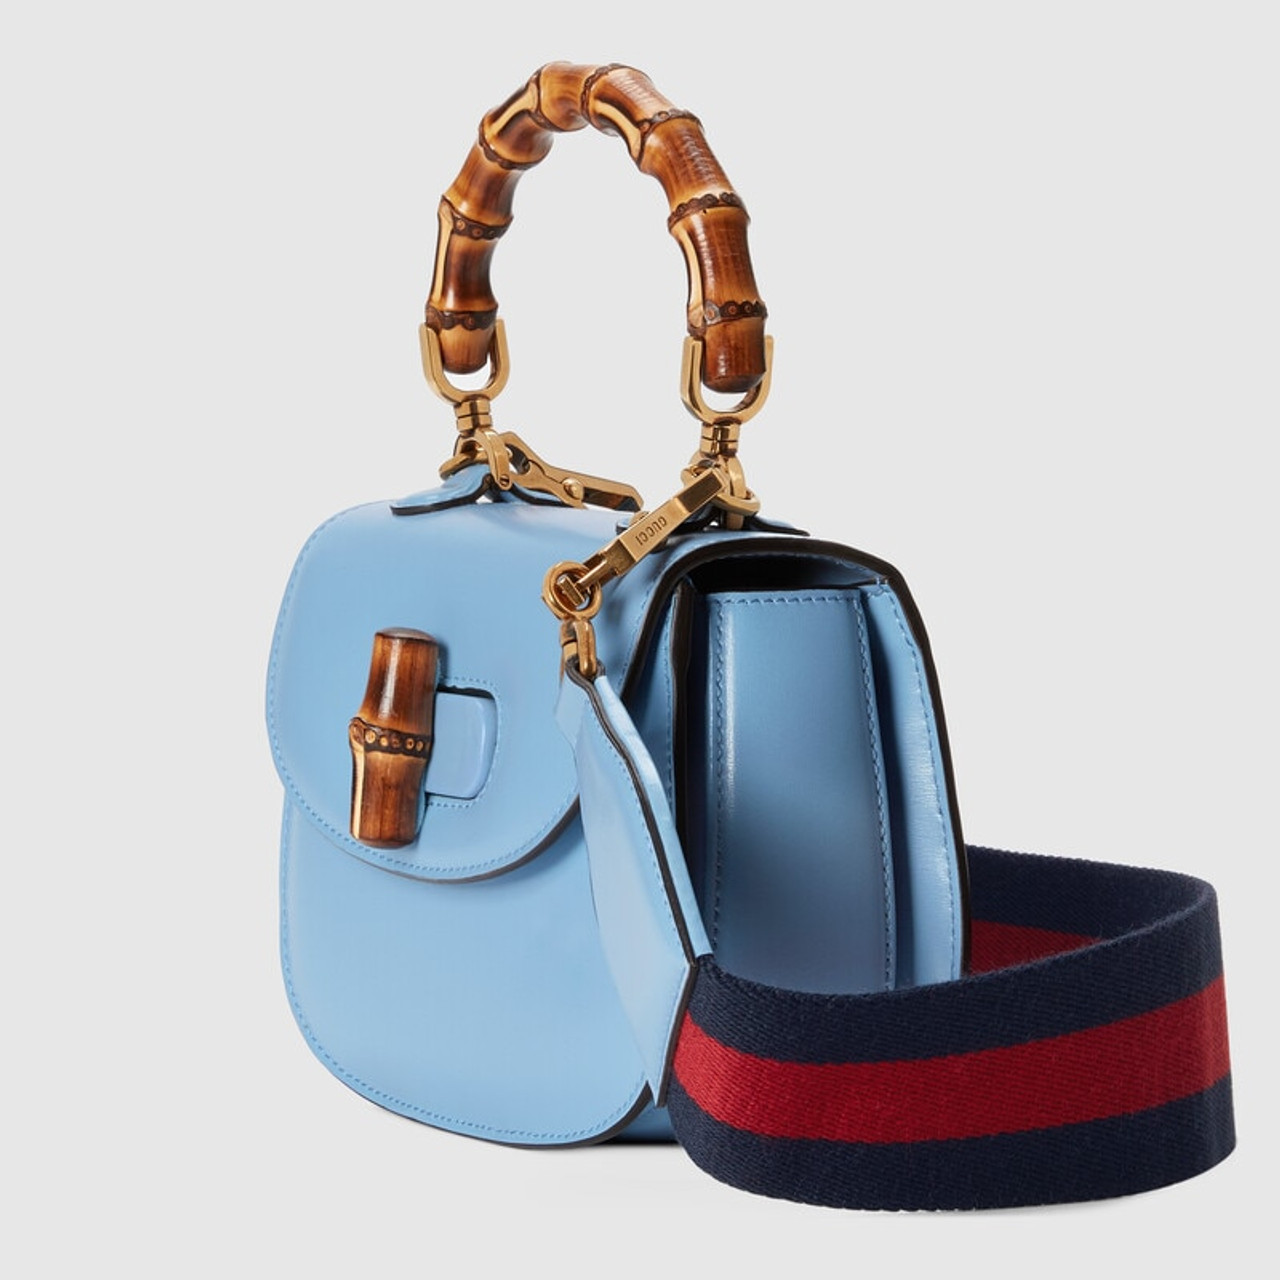 Gucci Bamboo 1947 Collection - Gucci Bamboo Handle Bags